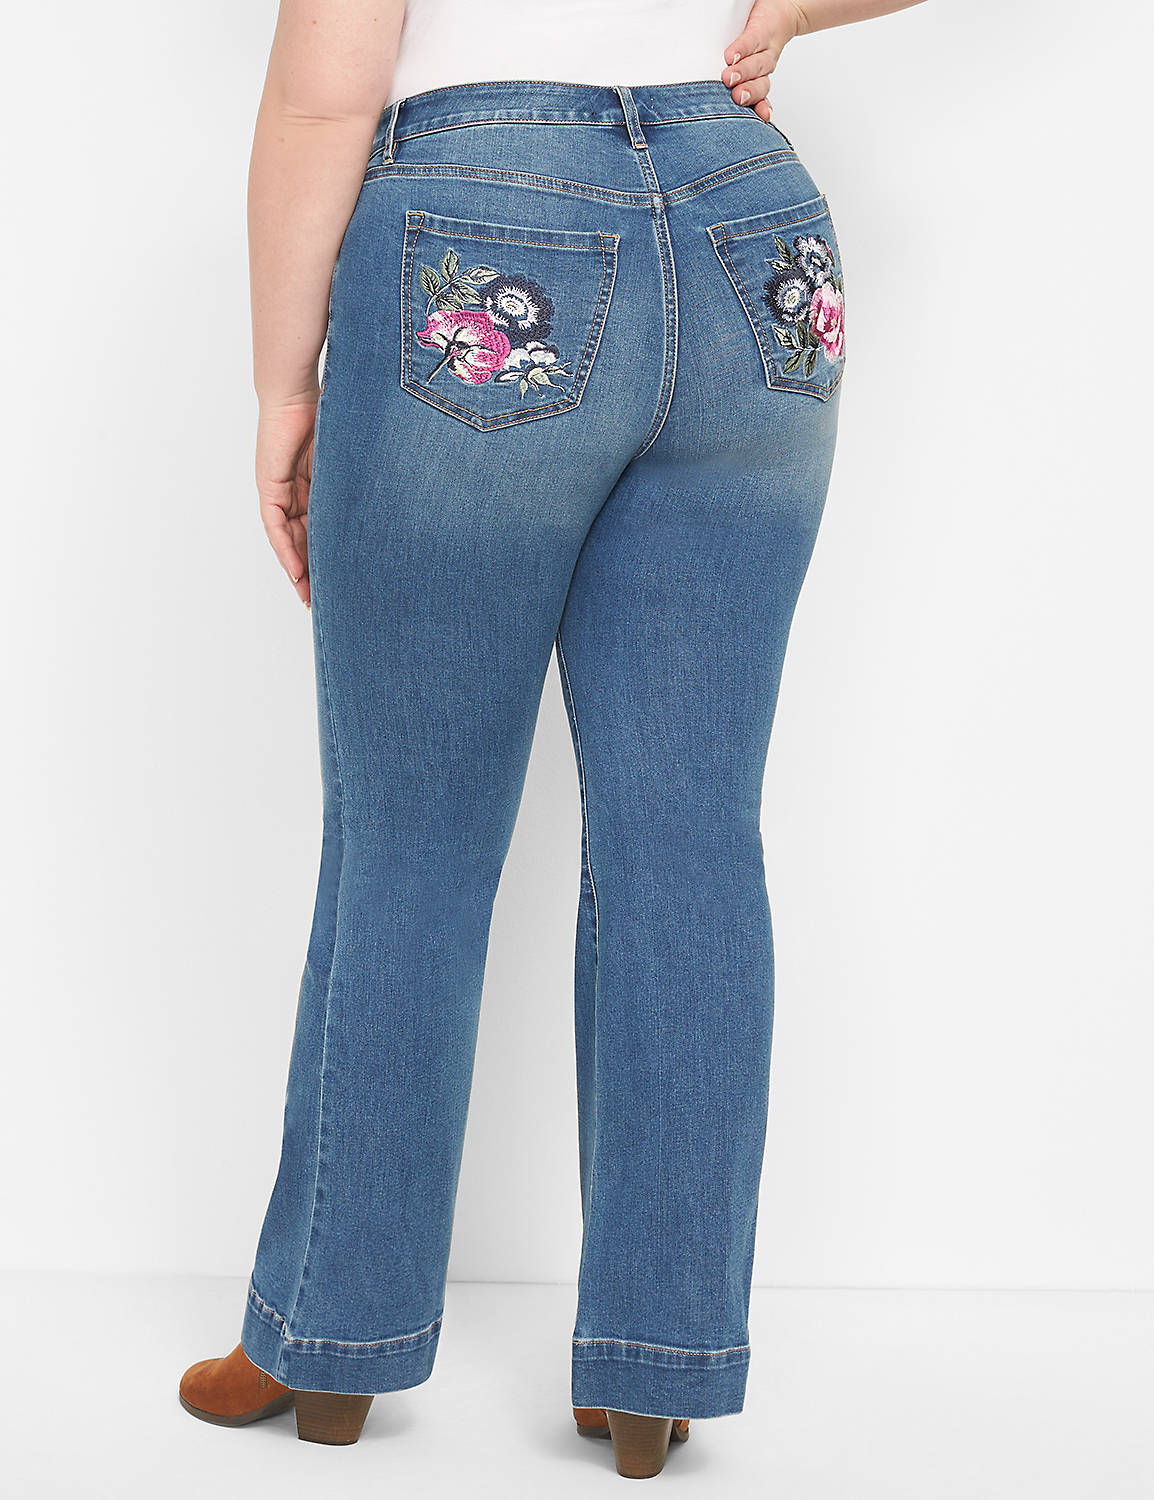 SIGNATURE FIT FLARE JEAN -AZUR WASH Product Image 1